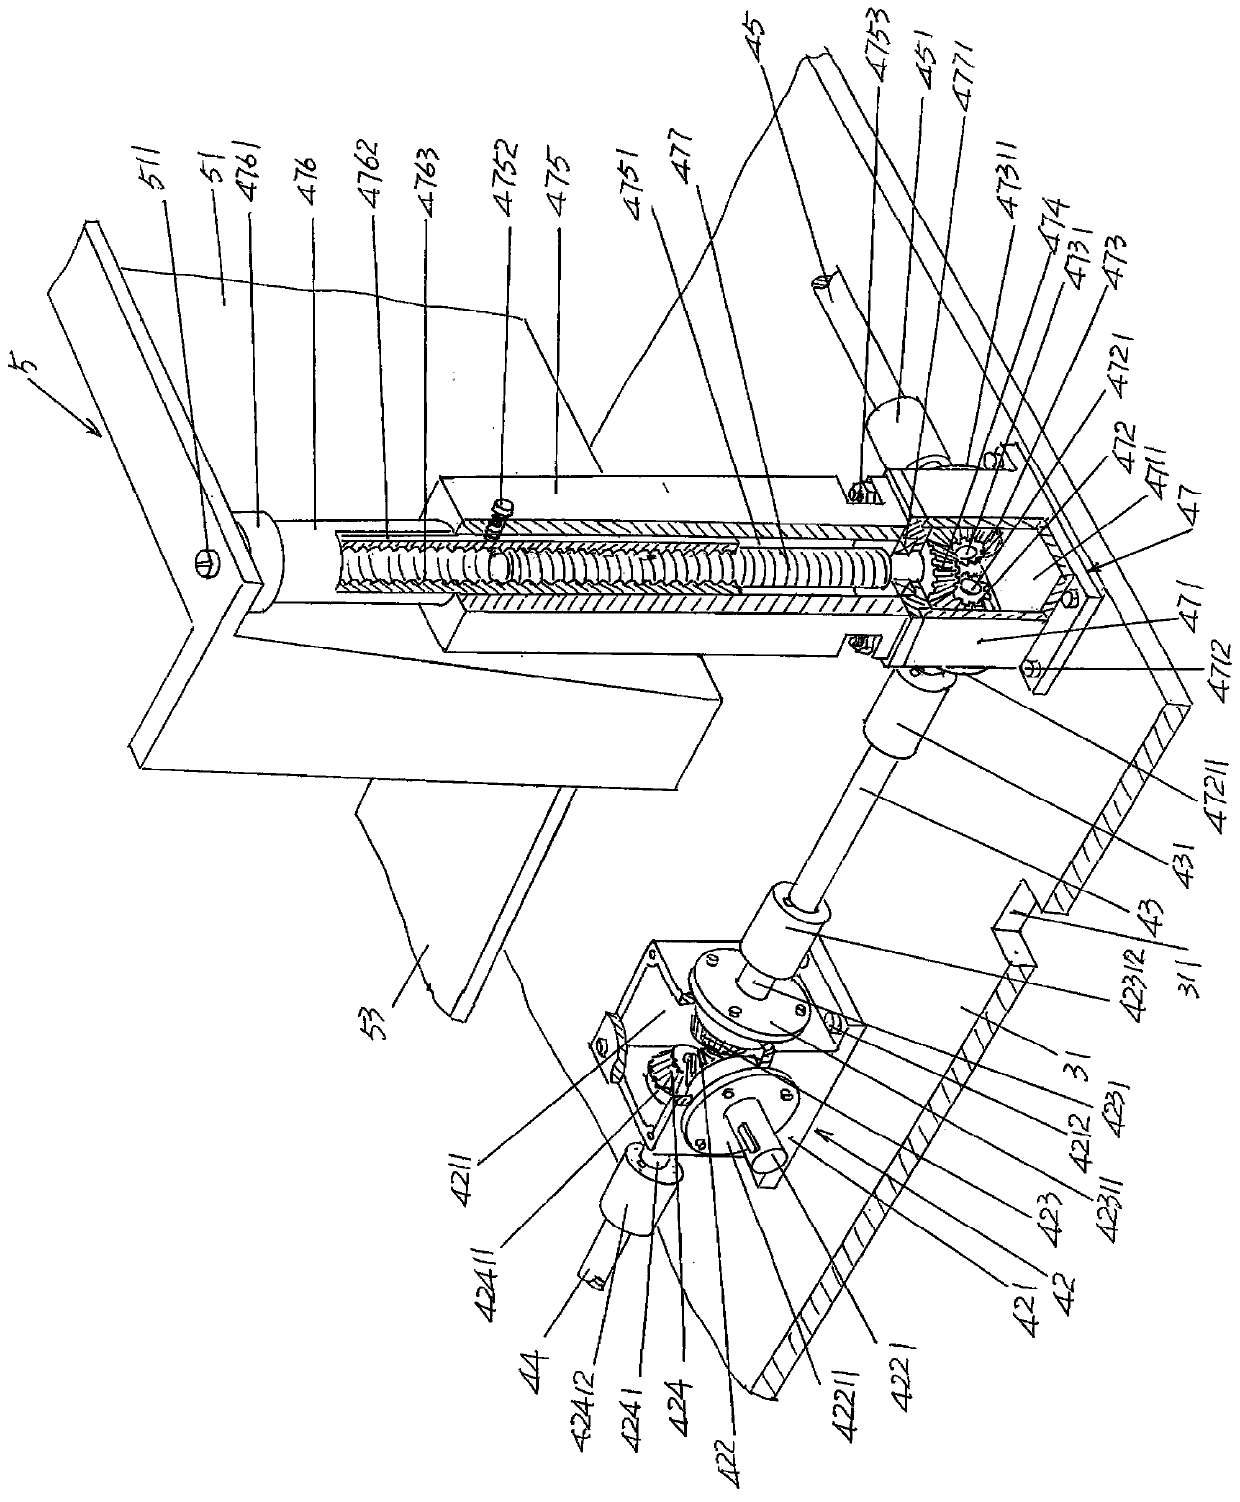 Turnover box conveying device